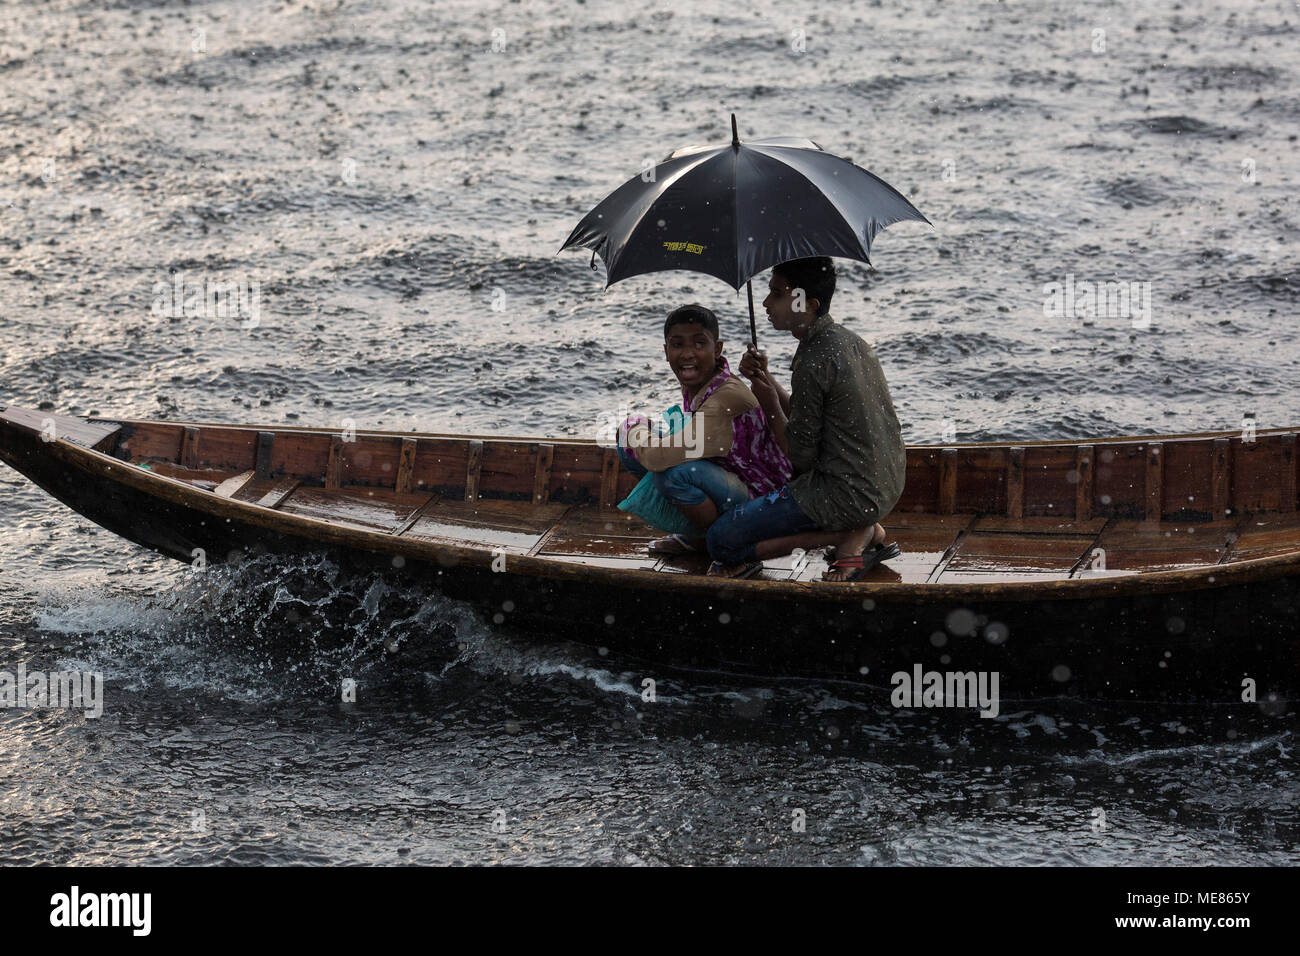 Dhaka, Bangladesh. 21st April, 2018.  Bangladeshi commuters use boats to cross the Buriganga River  during rain in Dhaka, Bangladesh on April 21, 2018.  The Buriganga River is economically very important to Dhaka, used to transport a multitude of goods, produce and people everyday. It is estimated that some fifty thousand people cross the Buriganga River from Keraniganj to Dhaka, for work everyday. Credit: zakir hossain chowdhury zakir/Alamy Live News Stock Photo